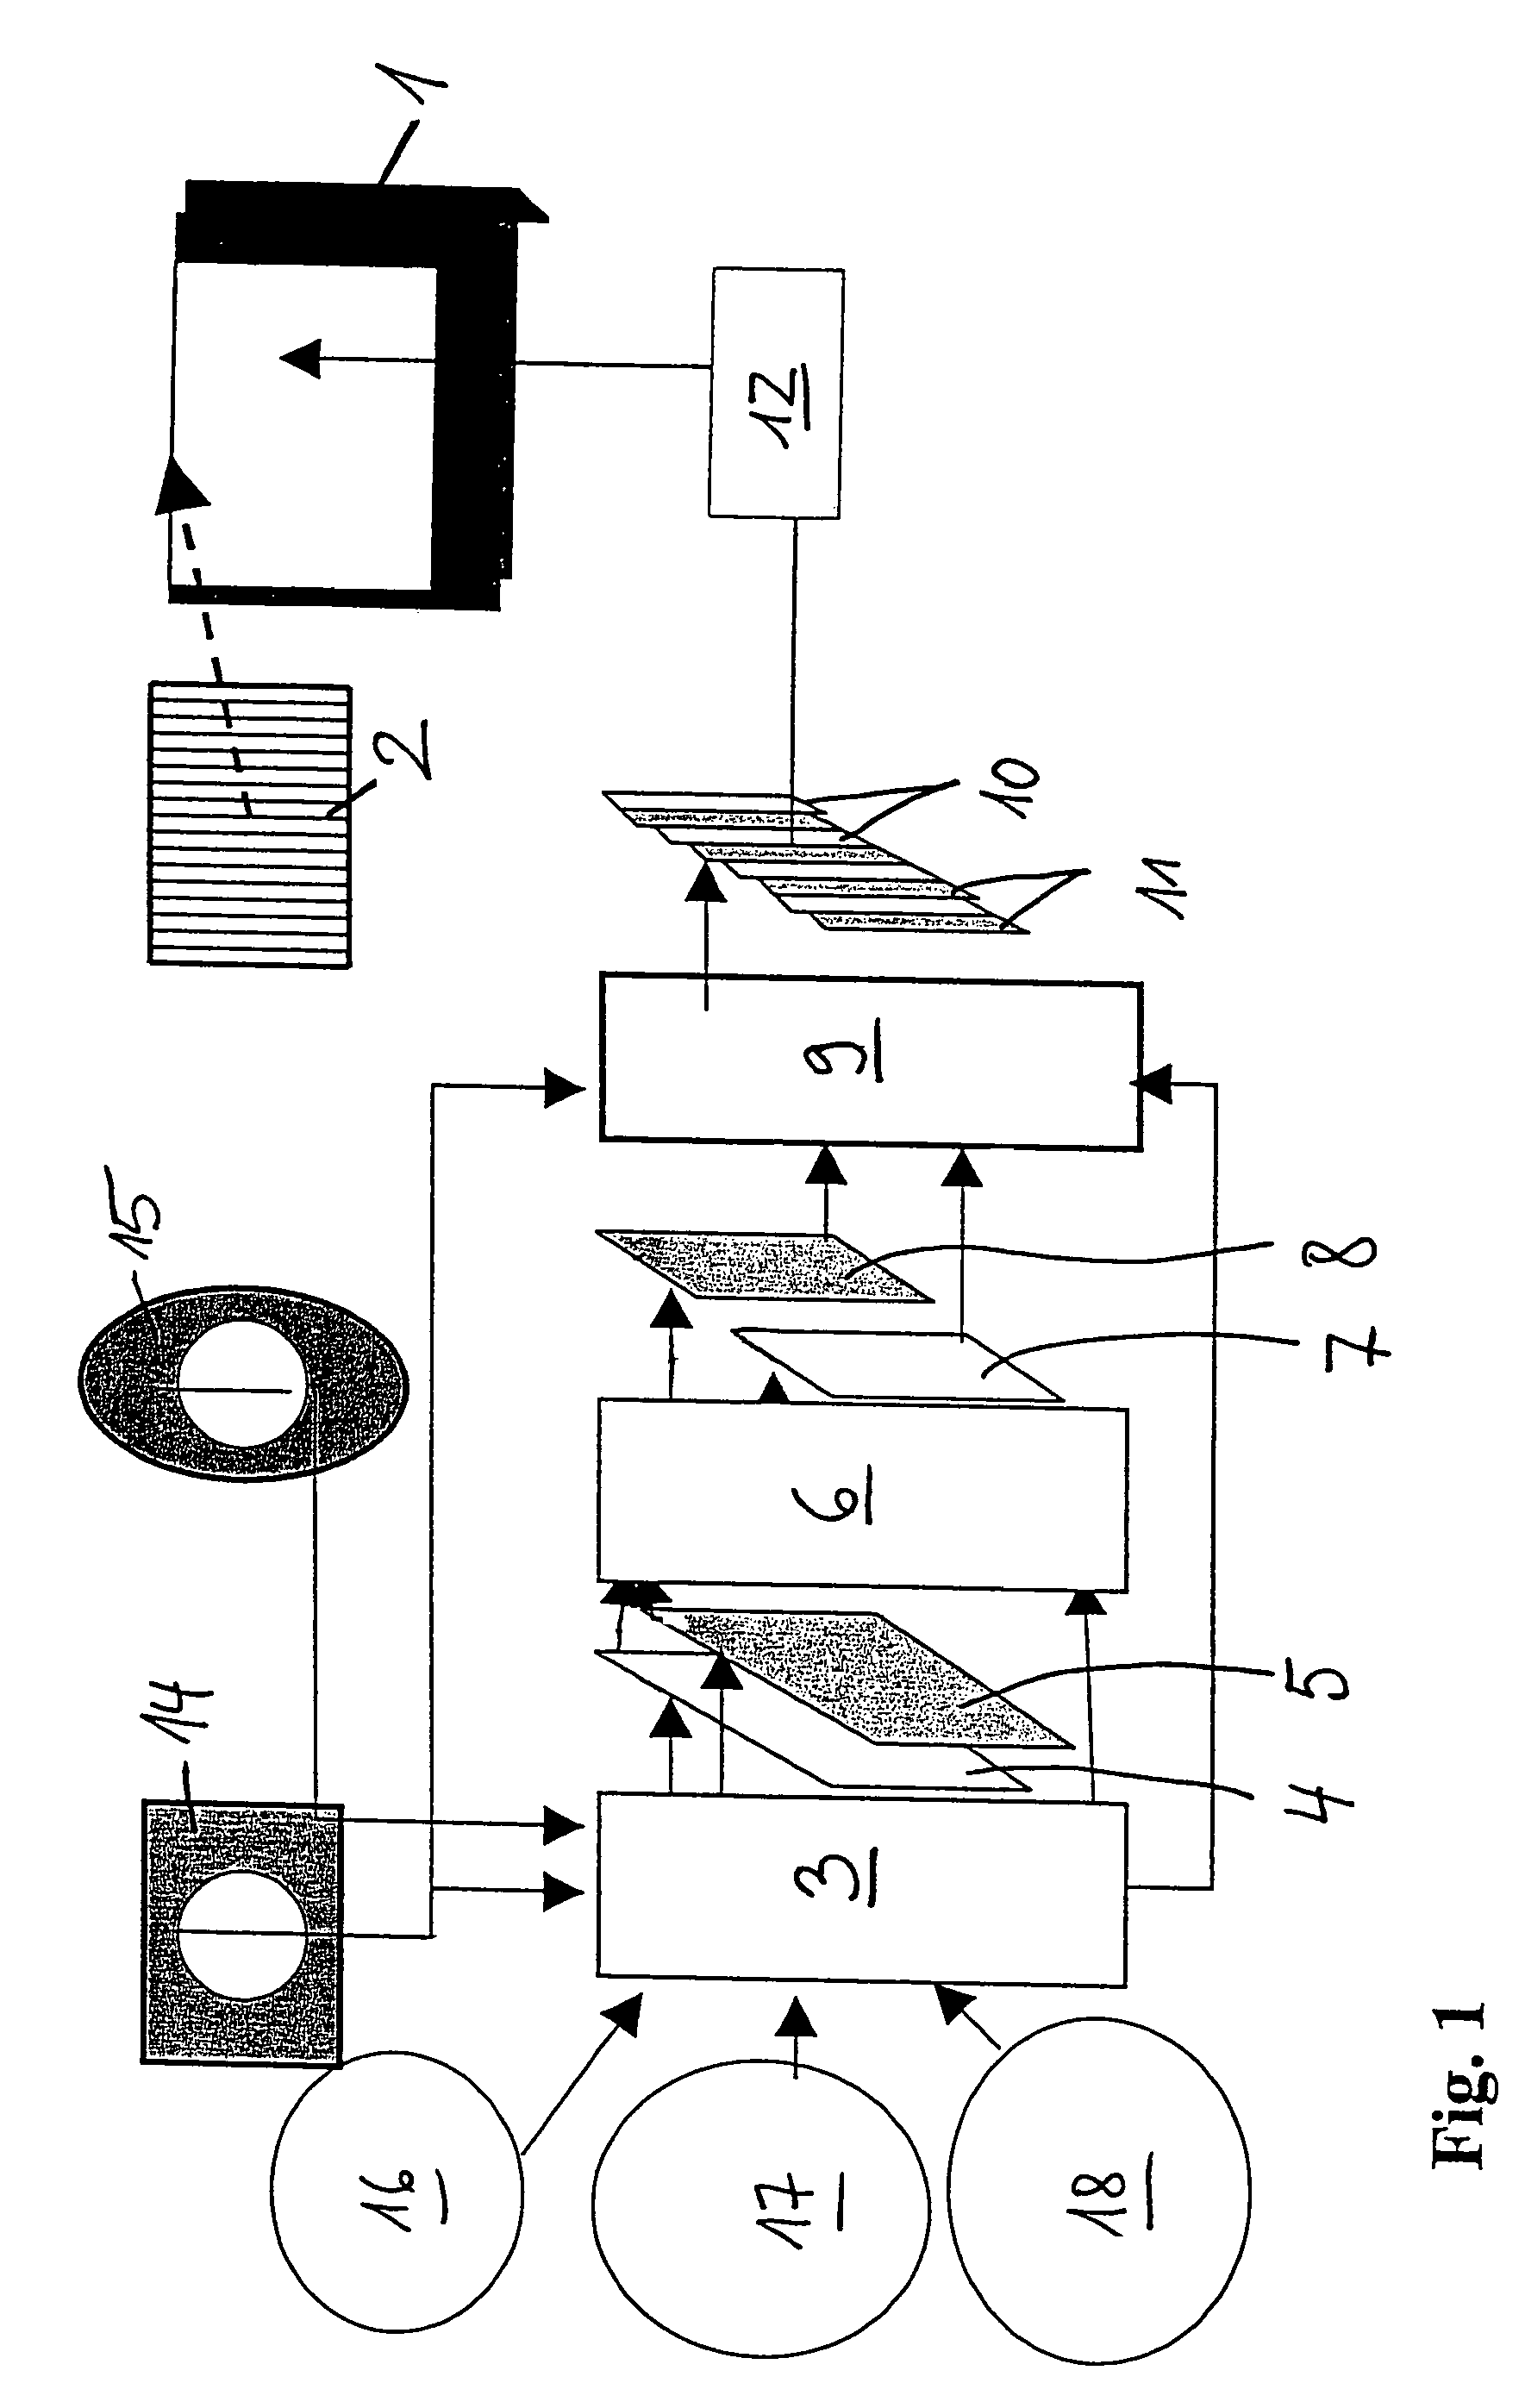 Autostereoscopic reproduction system for 3-D displays